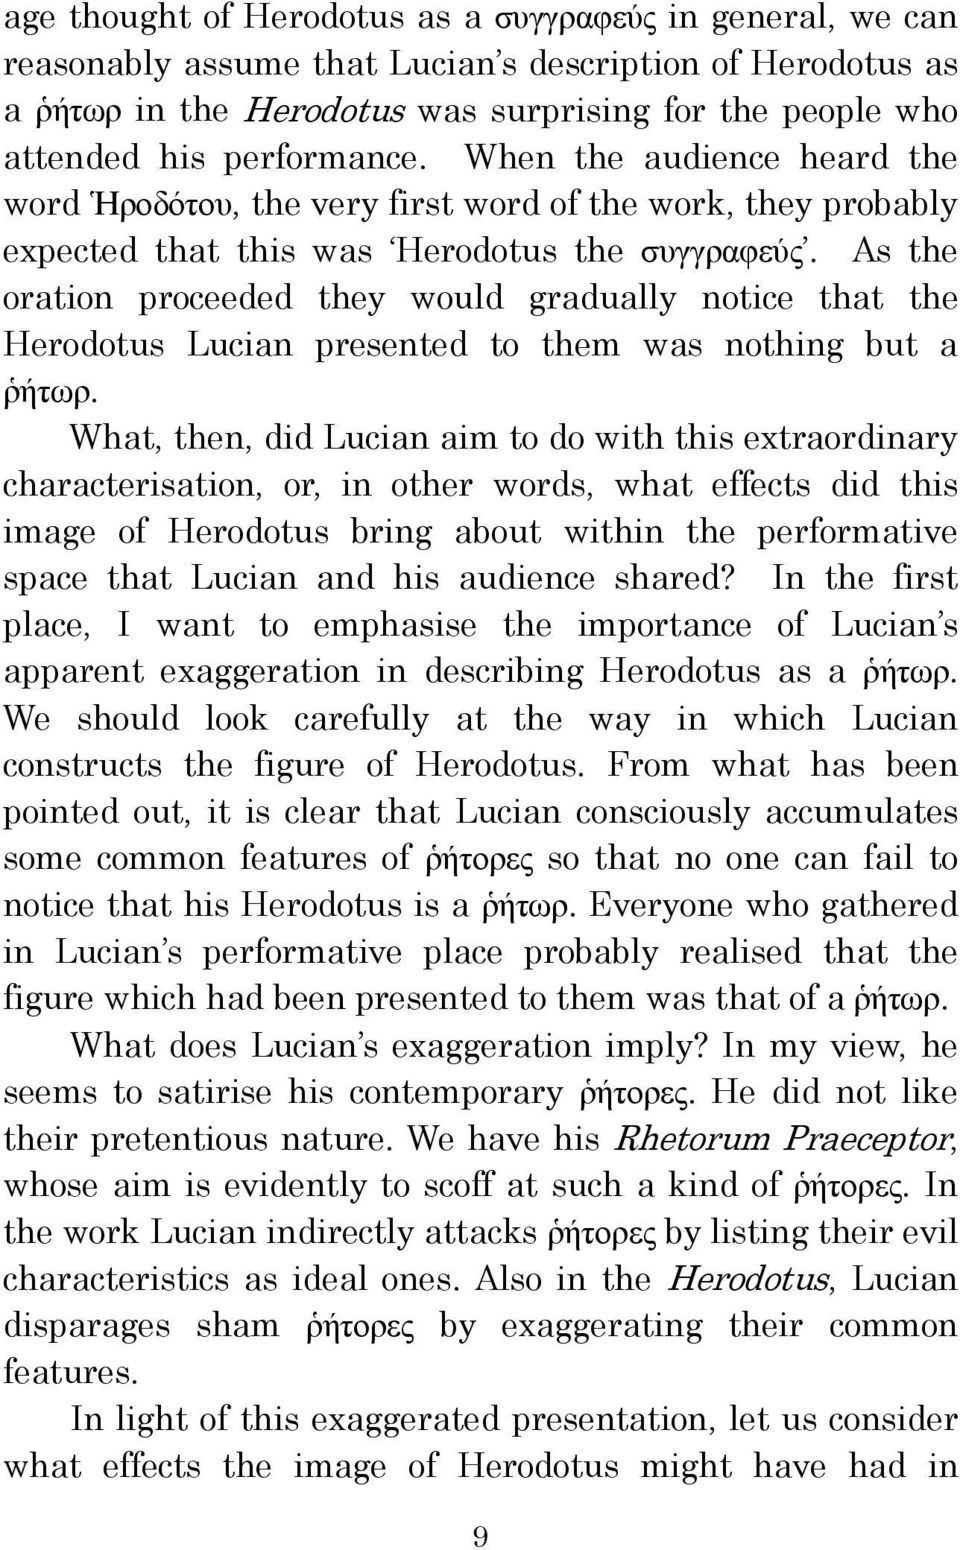 As the oration proceeded they would gradually notice that the Herodotus Lucian presented to them was nothing but a ῥήτωρ.